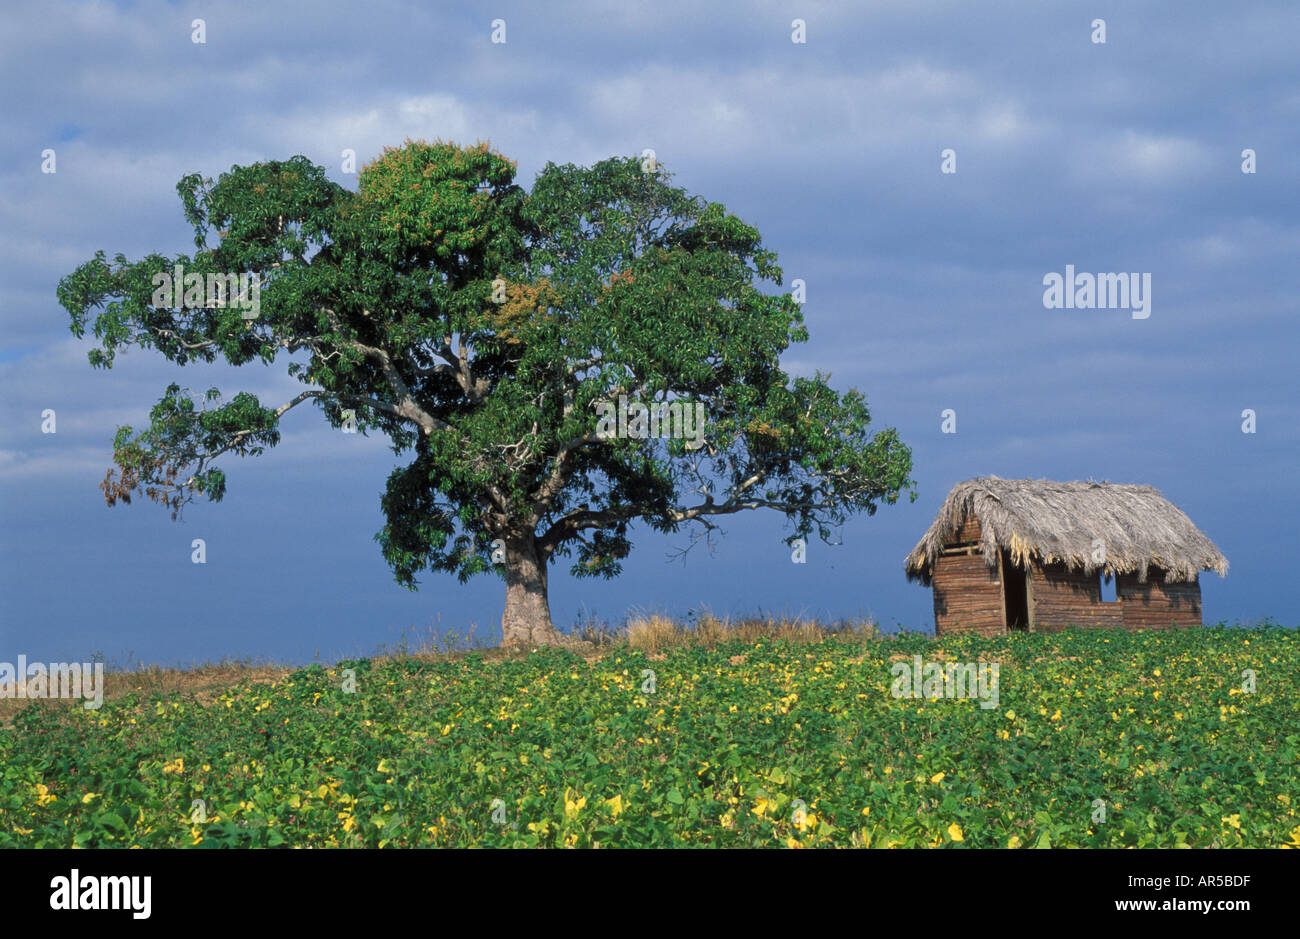 Farmshed with stroh roof and large tree Mango near Pinar del Rio W Cuba Stock Photo